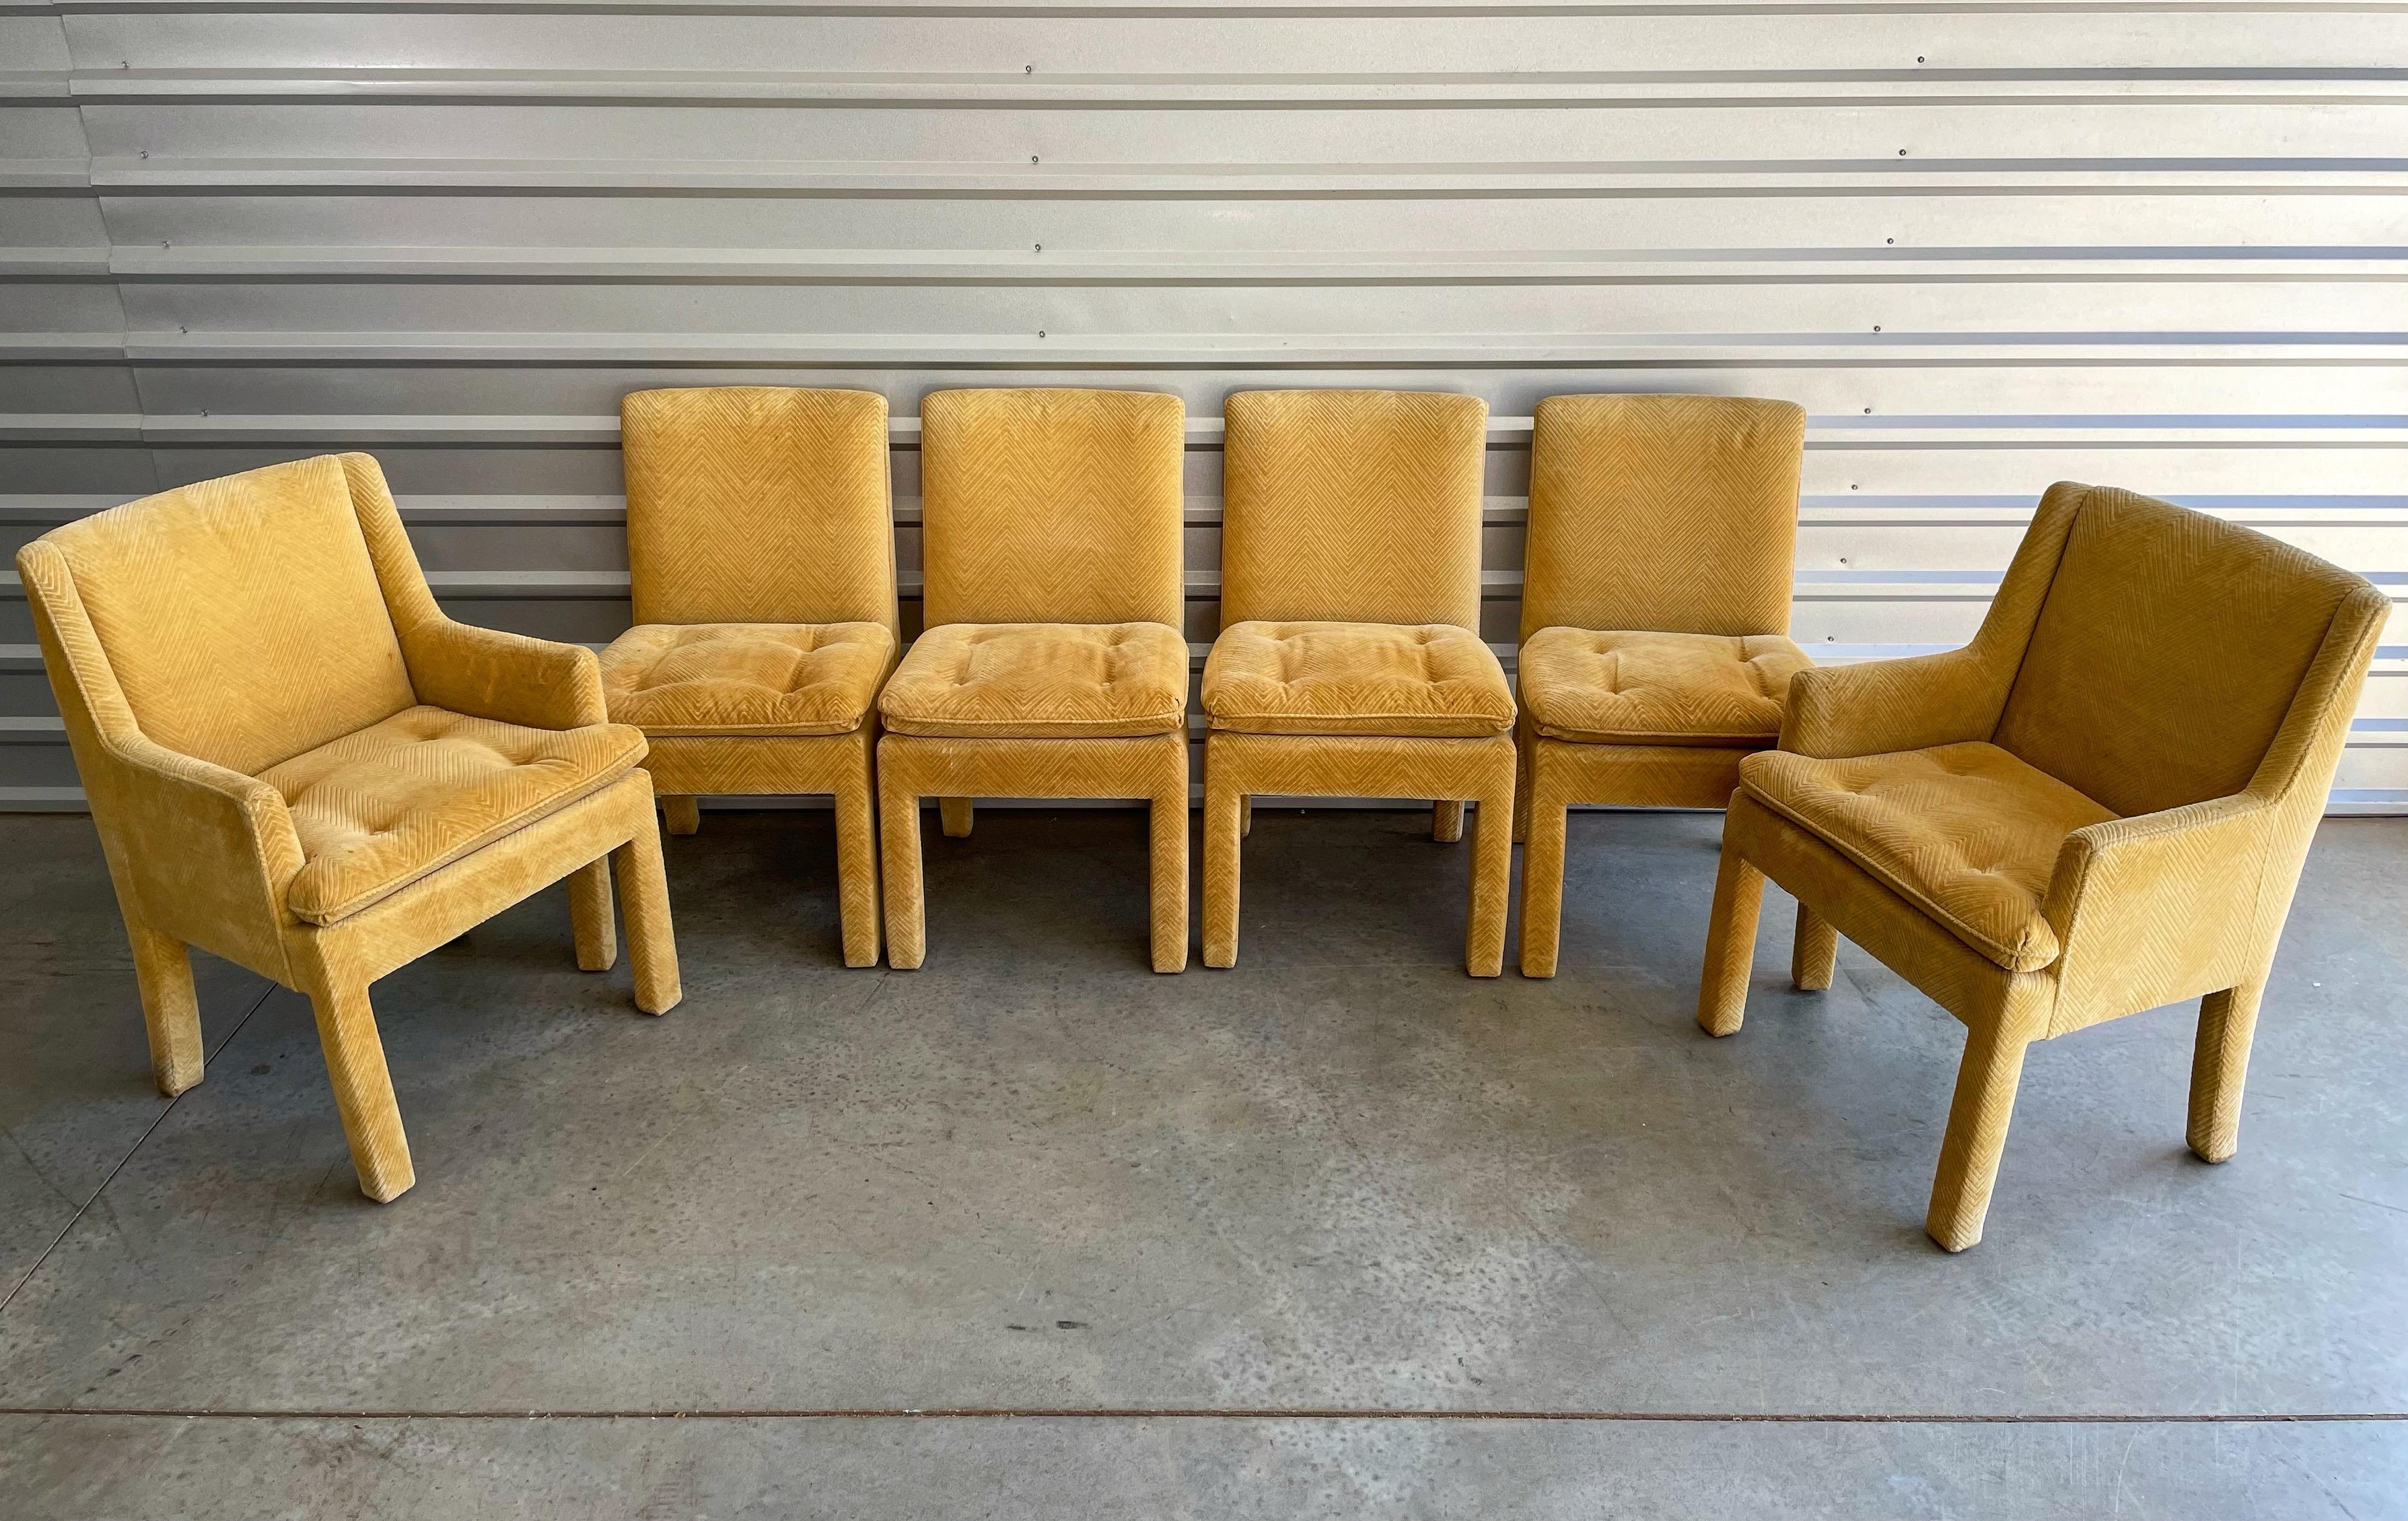 Set of 6 fully upholstered Parsons style dining chairs by Milo Baughman for Thayer Coggin in a harvest gold maize chevron. Two arm captain's chairs and four side chairs. Original upholstery is in very good condition, showing very minor signs of use.